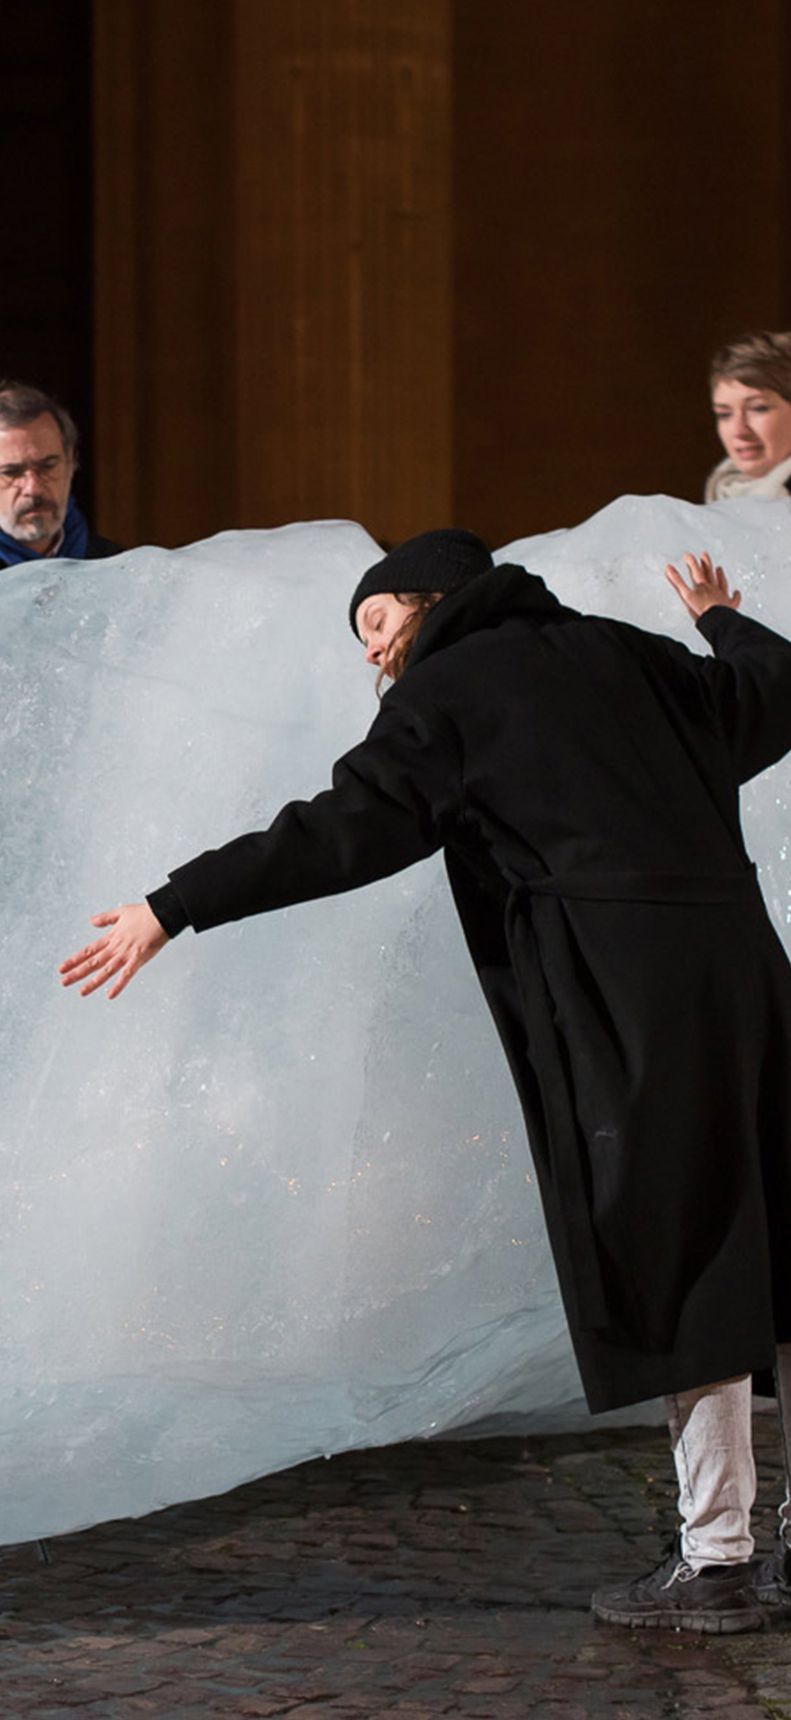 The Artists Leading the Conversation on Climate Change